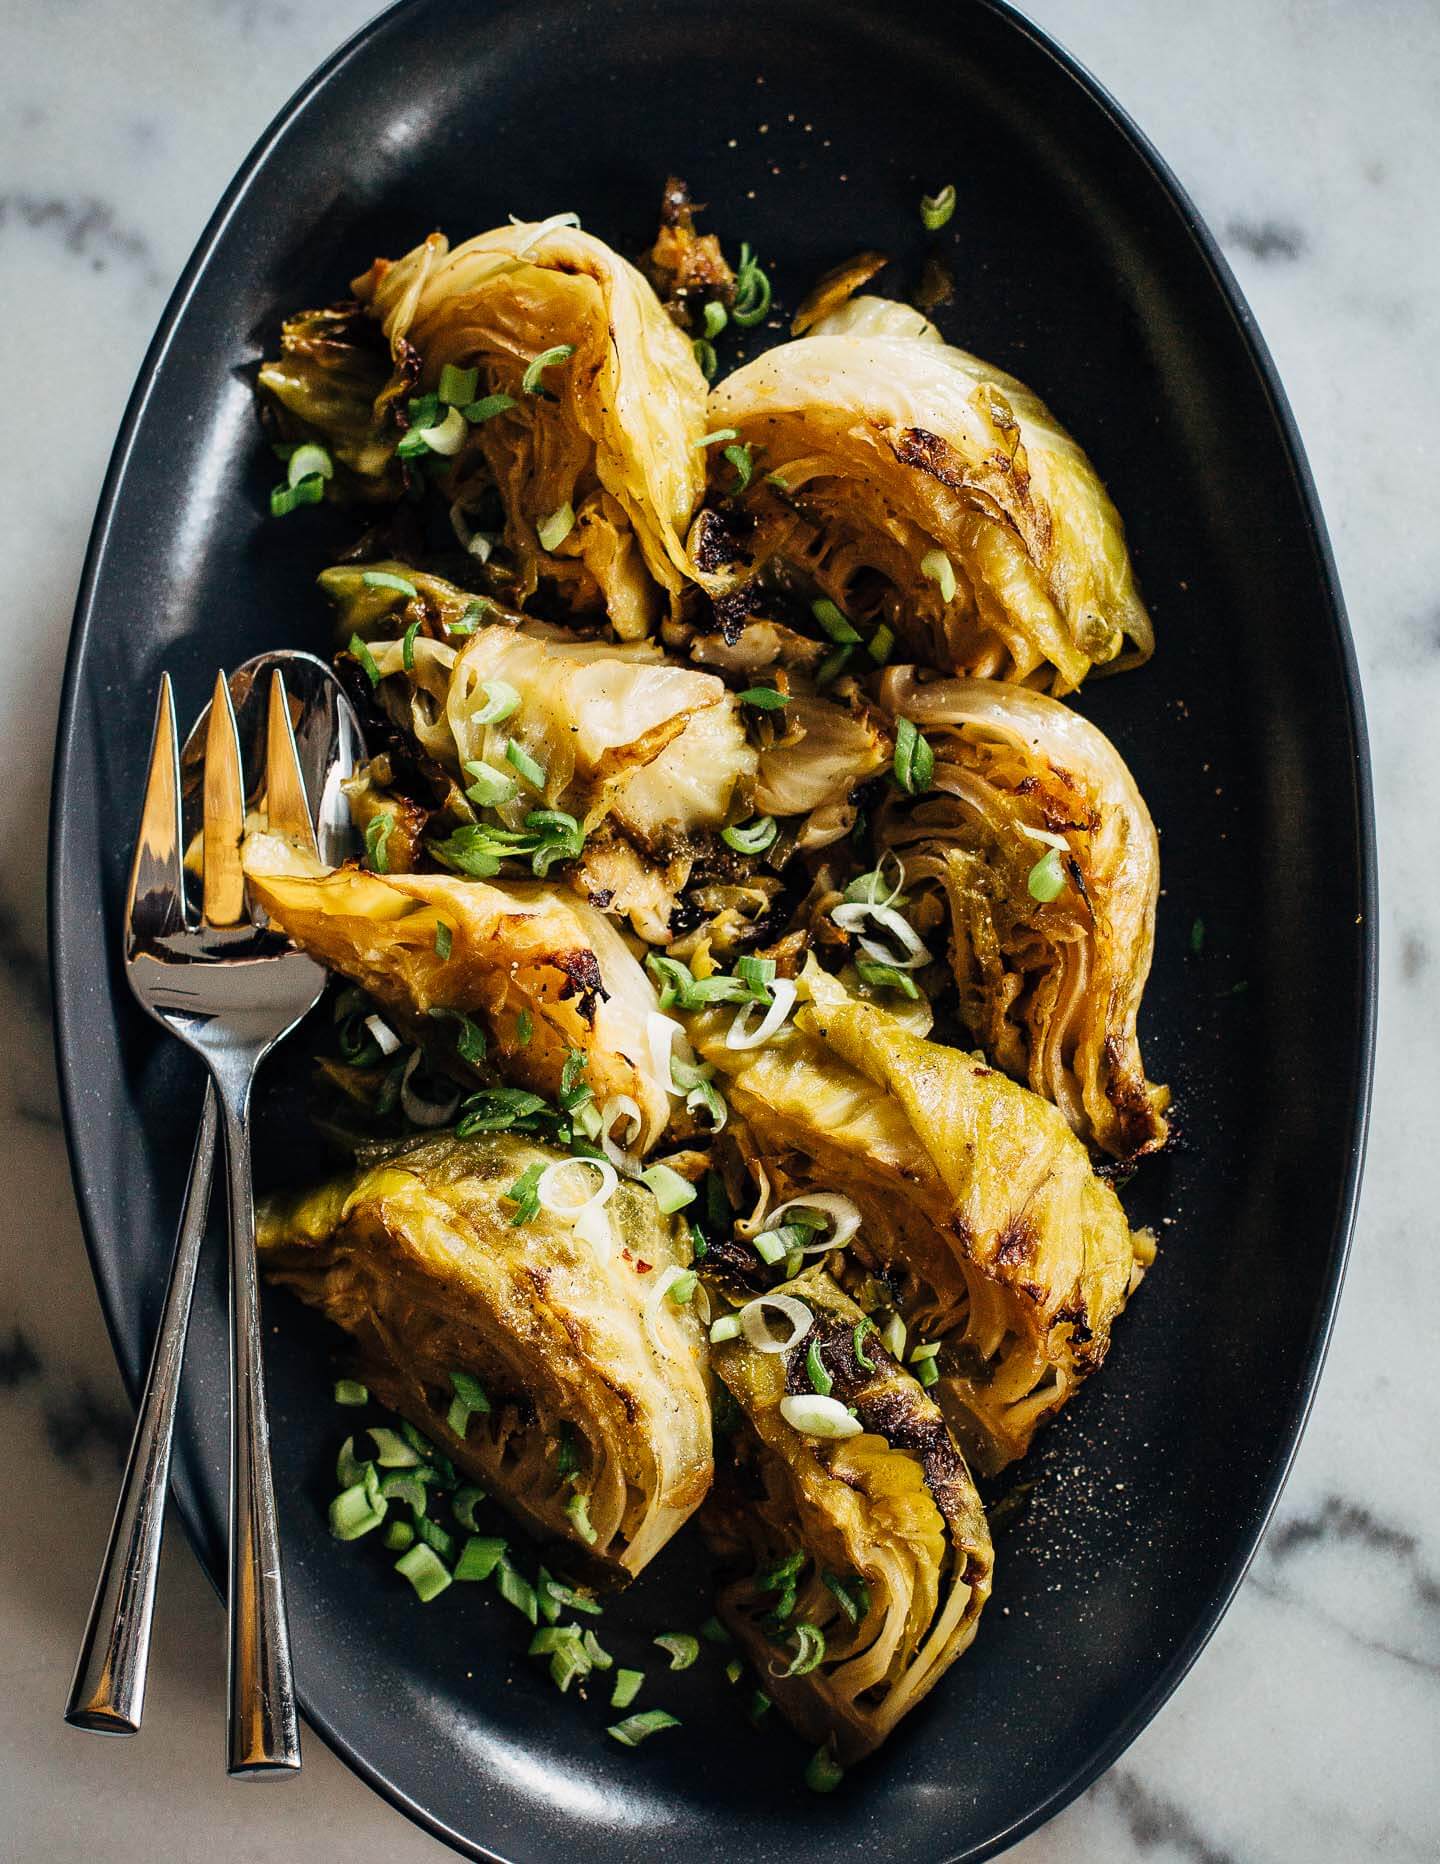 A two hour stint in a low oven makes for meltingly tender braised cabbage wedges cooked with spring onions and a hint of lemon.